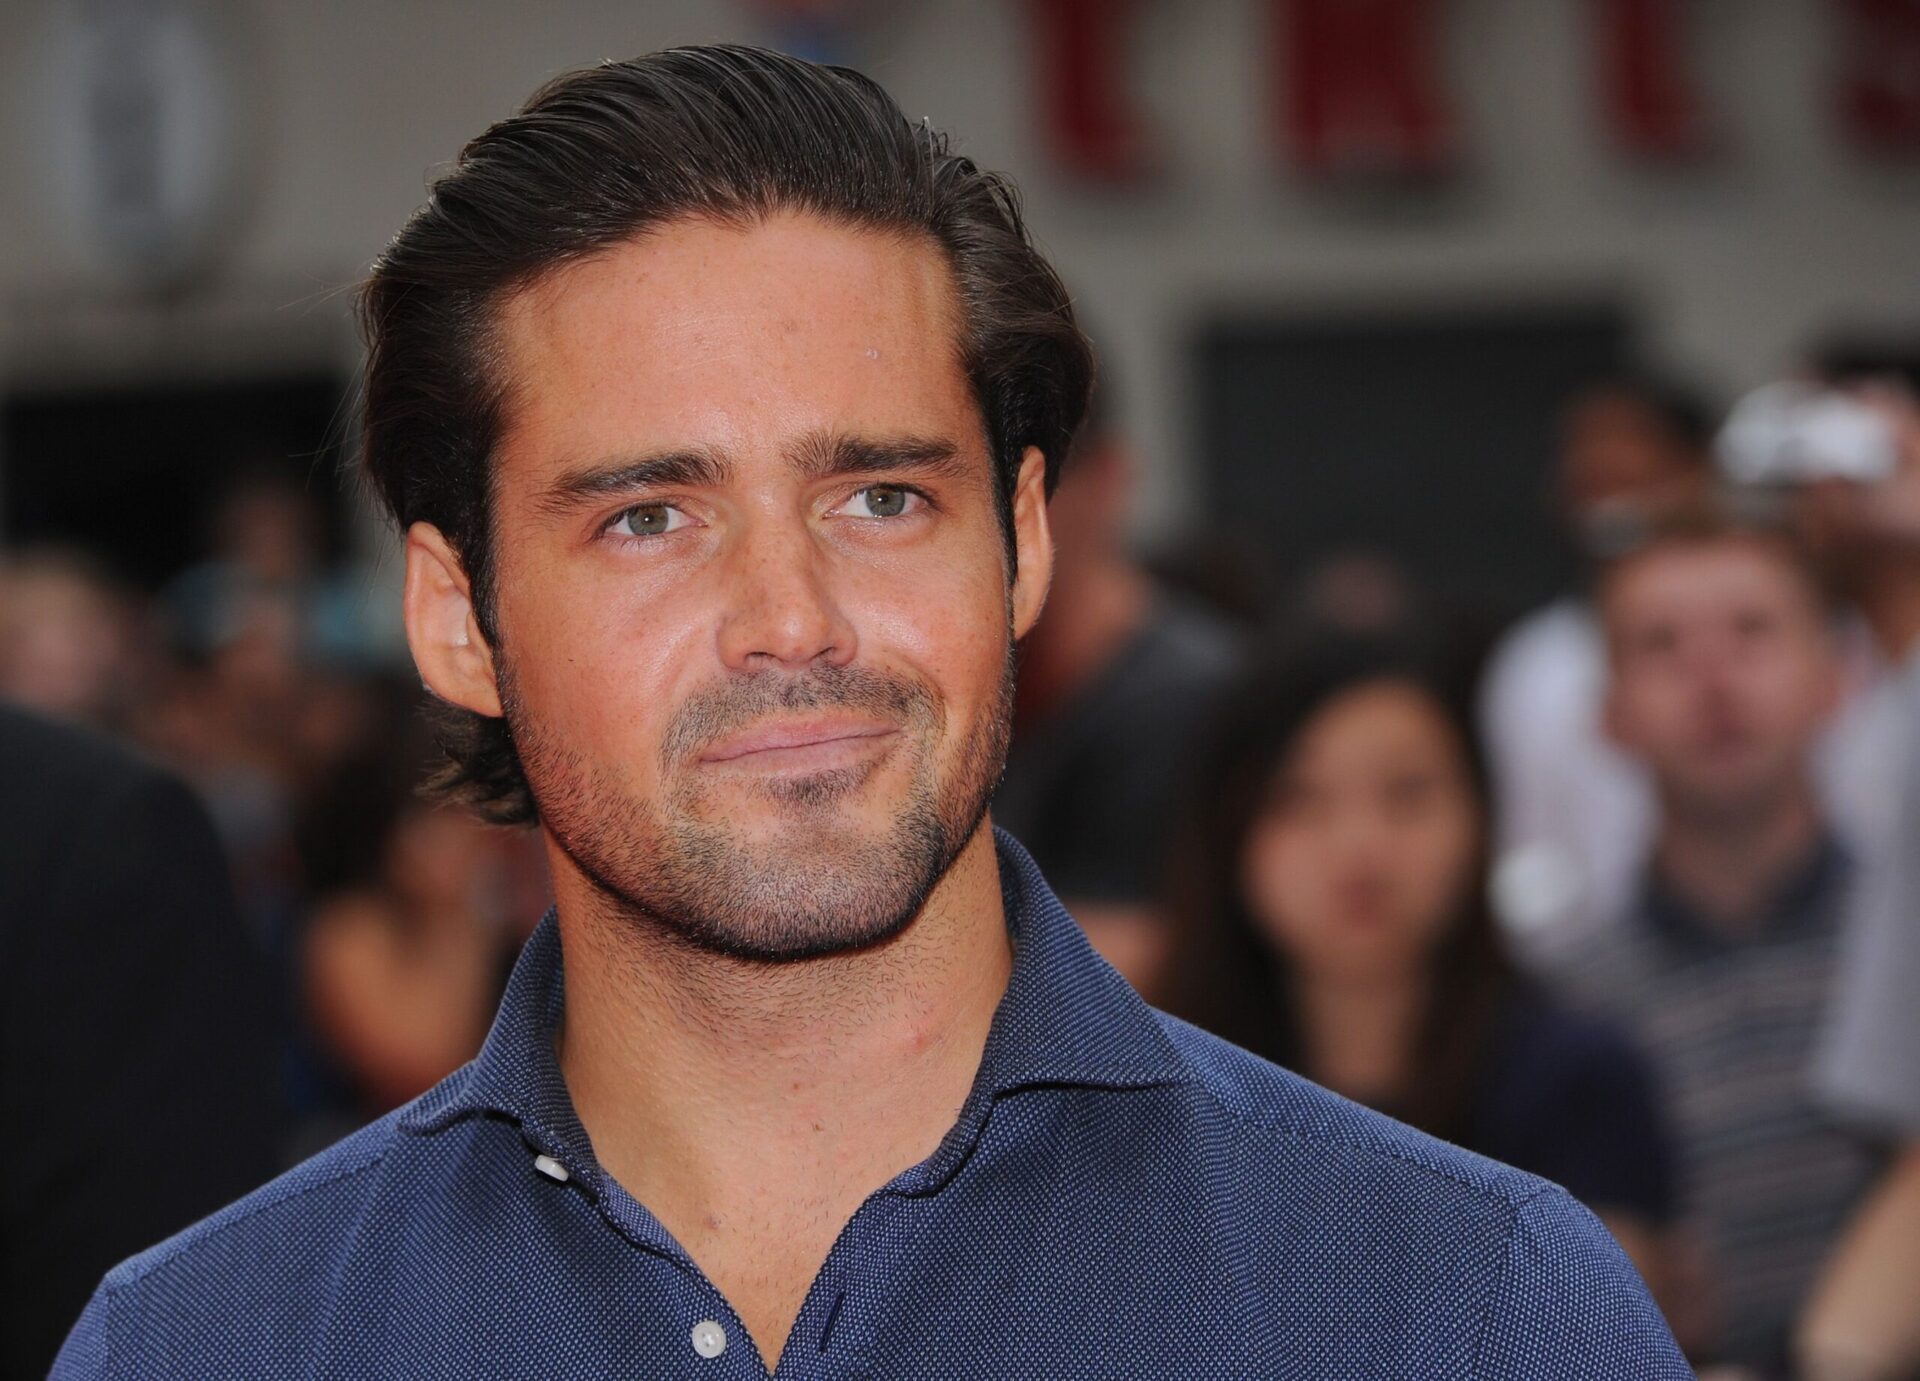 Spencer Matthews Biography: Net Worth, Age, Children, Wife, Pictures, Wikipedia